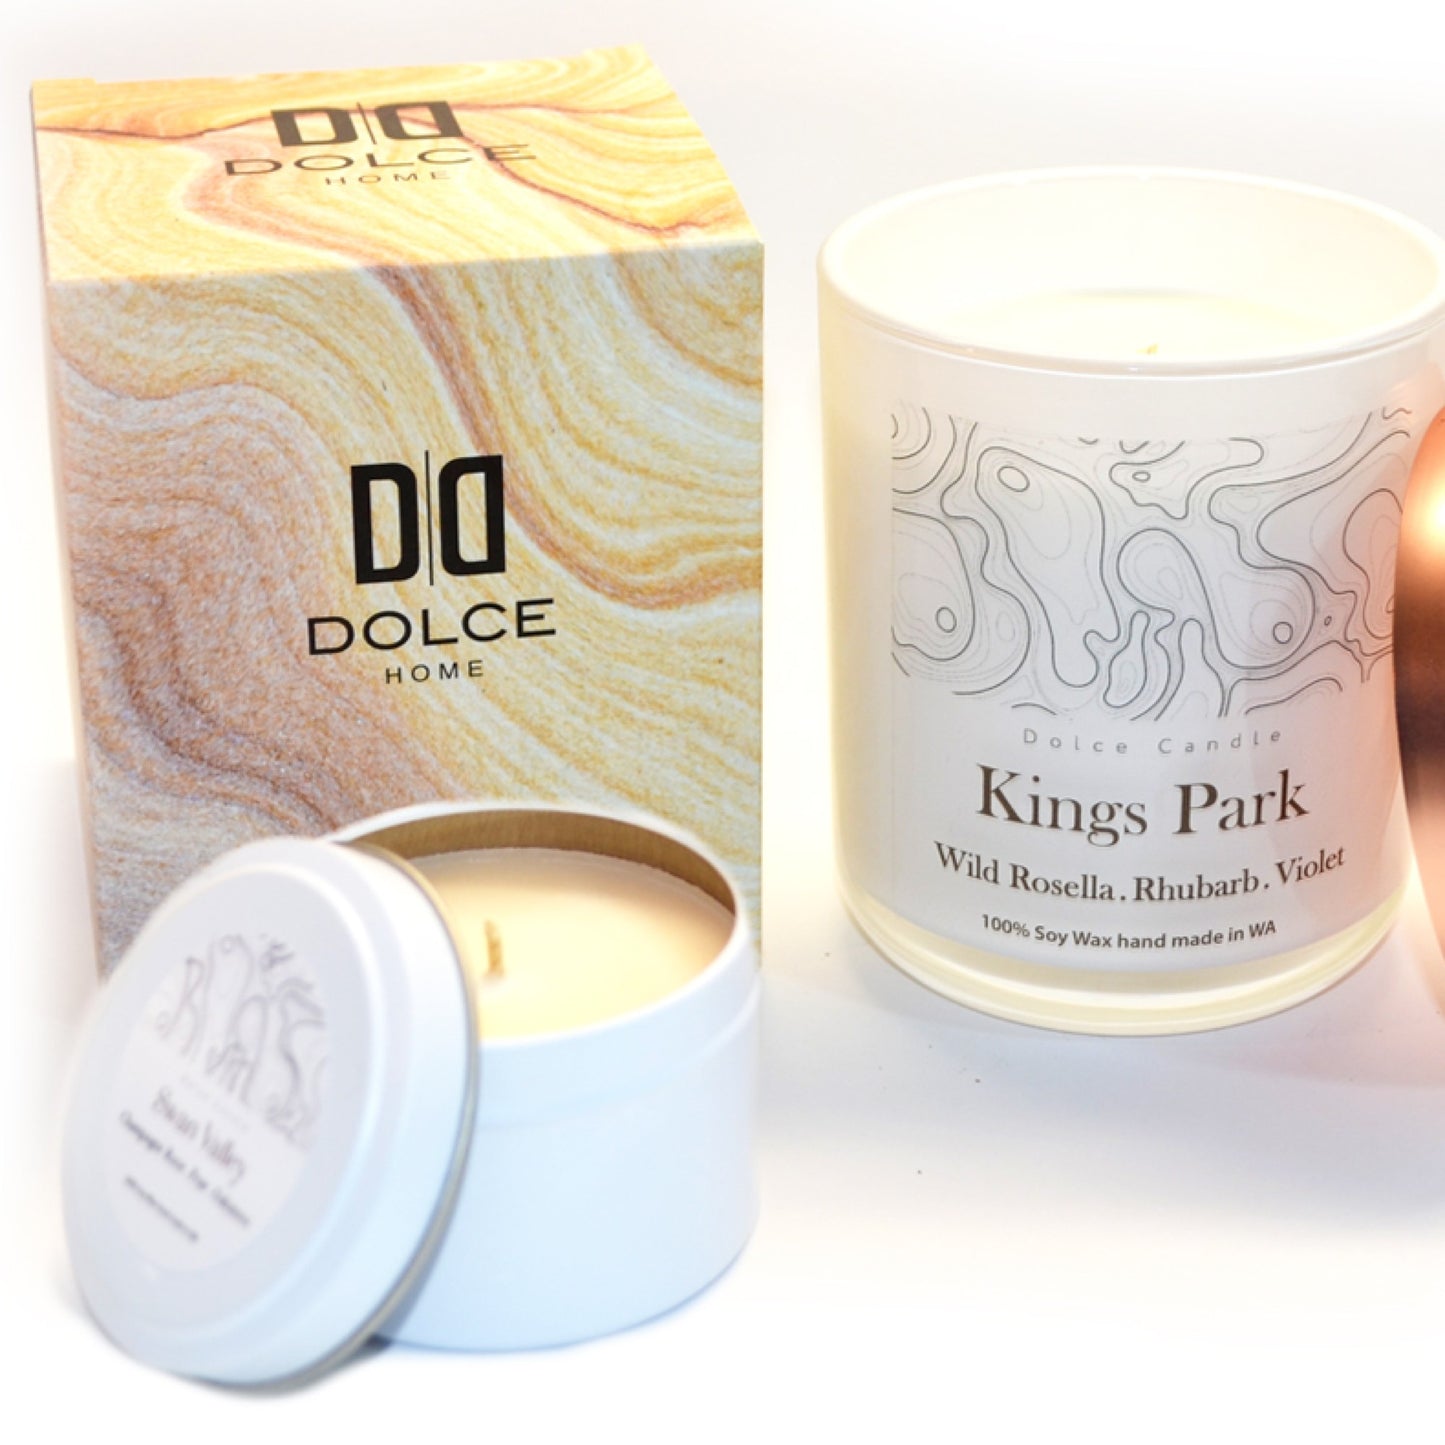 Kings Park | 300g Soy Wax Candle | Dolce Home | Handmade in W.A.